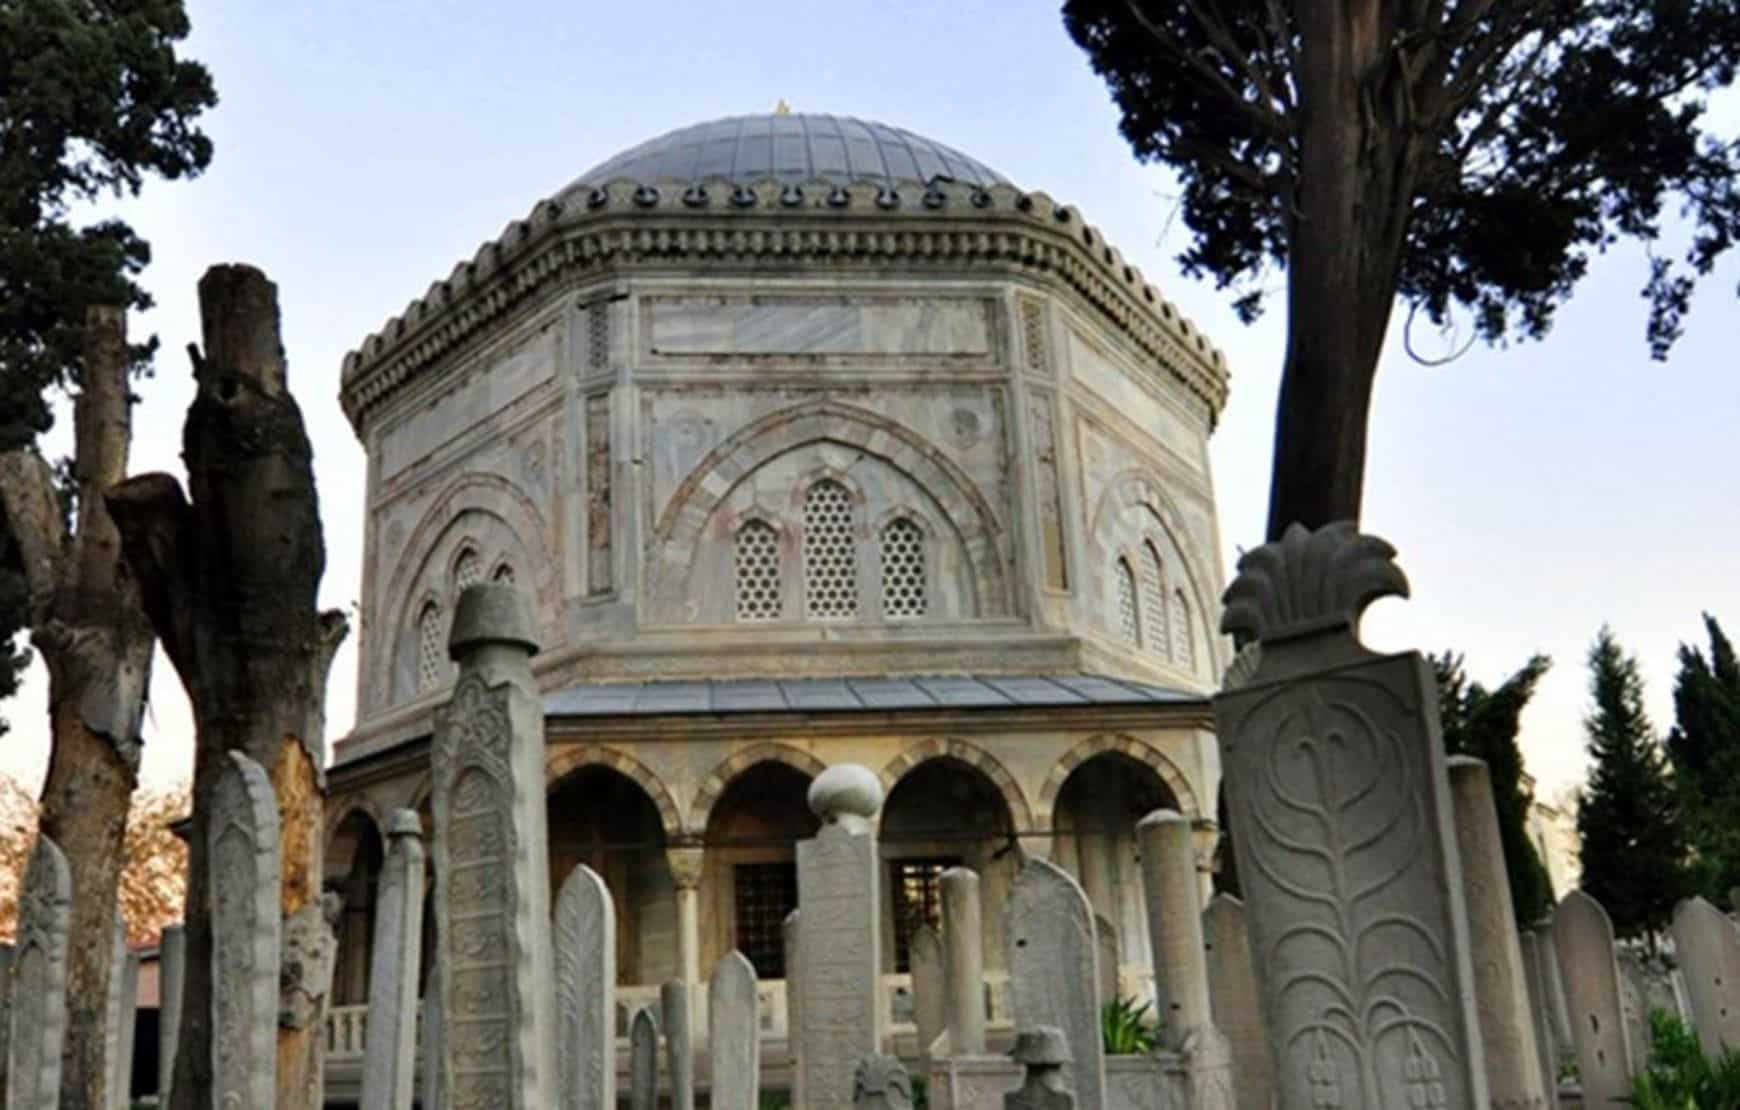 We'll visit Sultan's tombs at our Istanbul guided tour